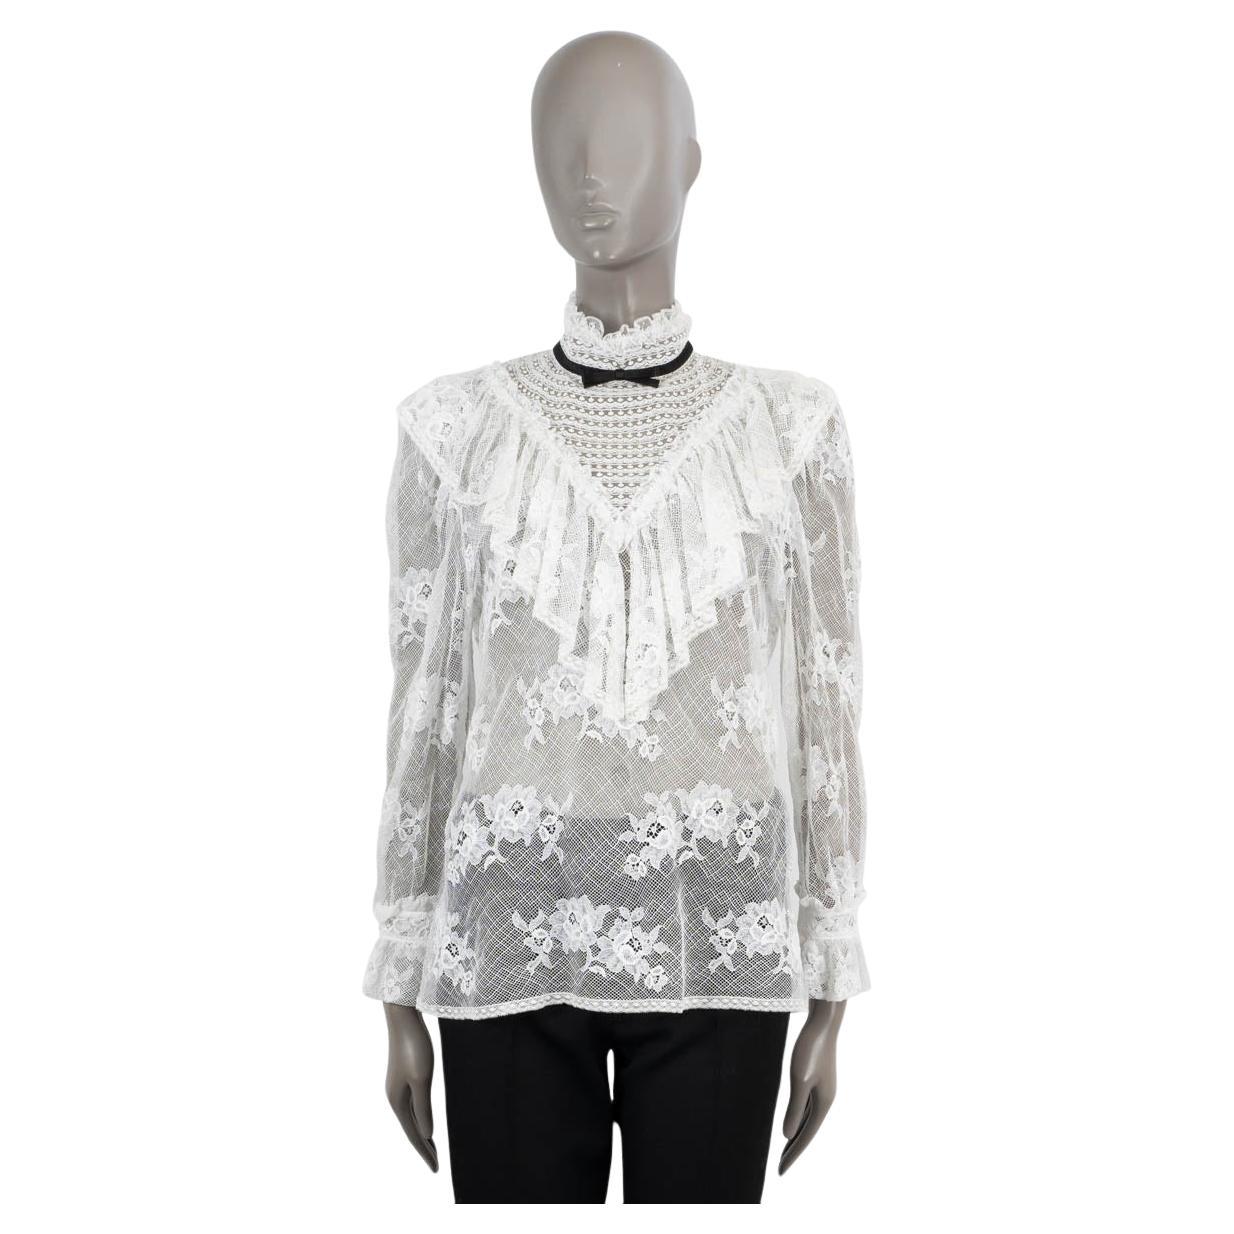 MIU MIU white cotton 2019 SHEER RUFFLED FLORAL LACE MOCK NECK Blouse Shirt S For Sale